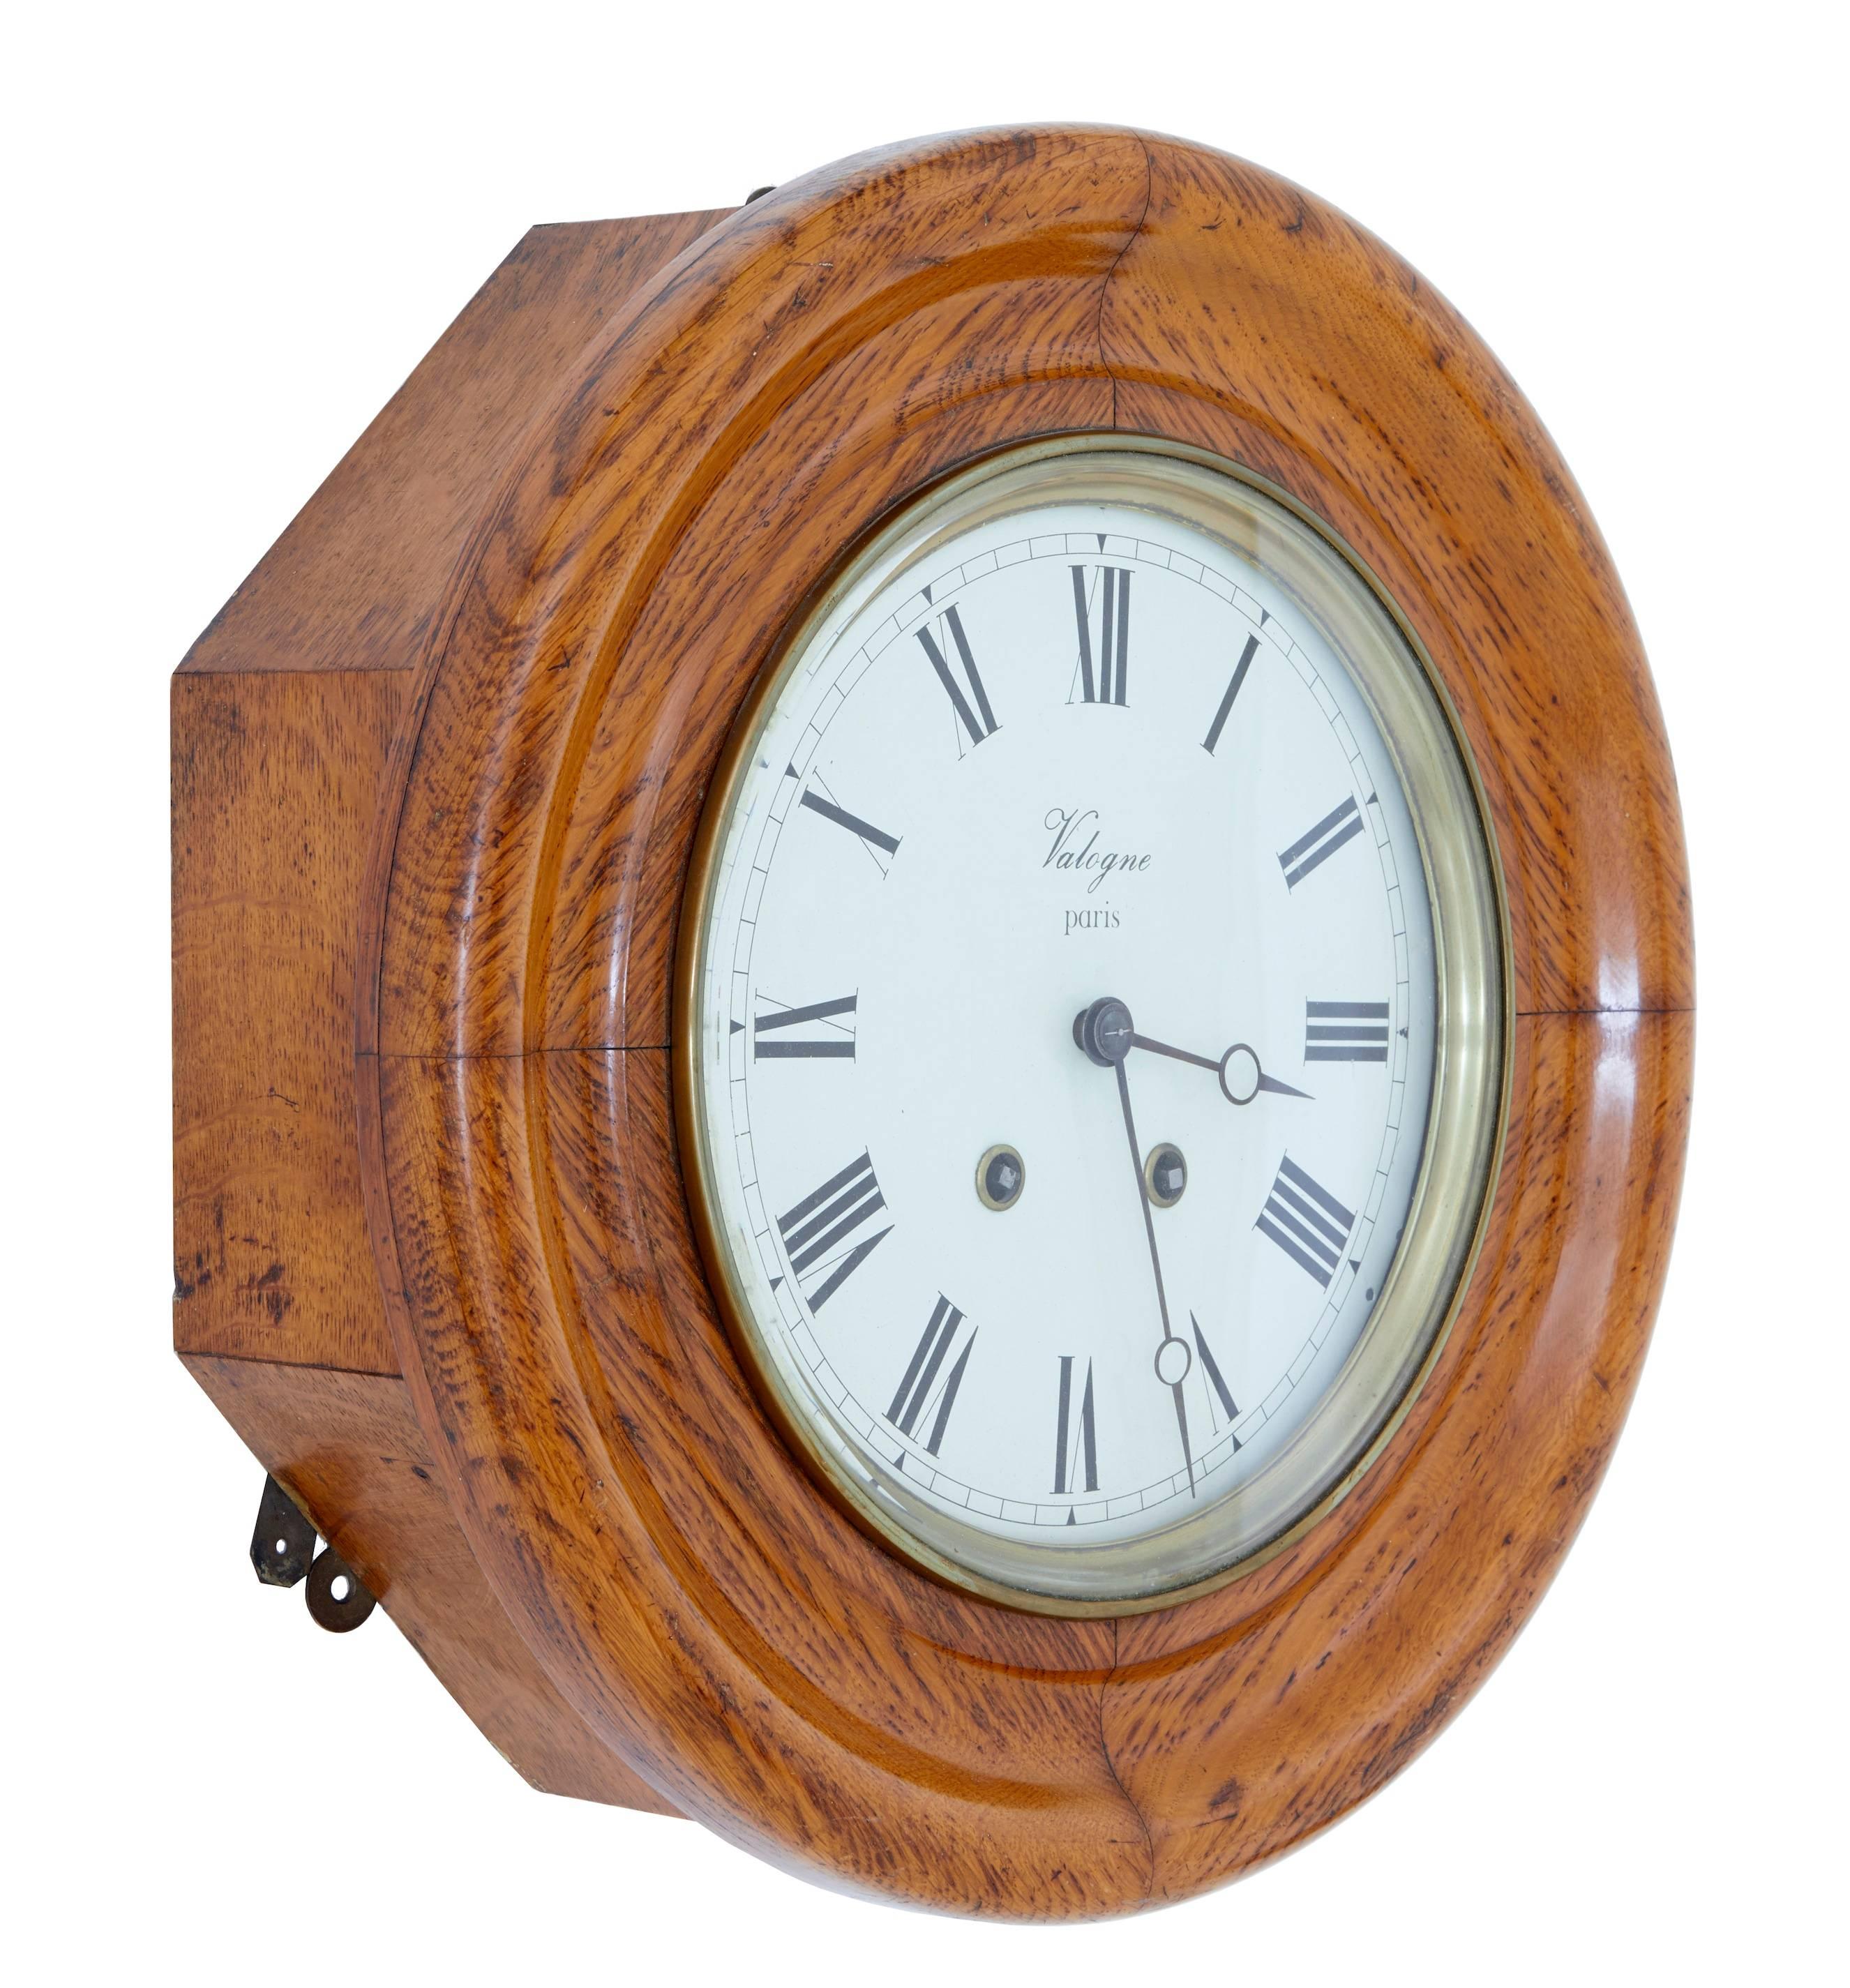 Good quality 19th century oak French wall clock.
Retailed by well-known Parisian retailer Valogne of Paris, as marked on the clock face.
Movement by Japy Freres.
Roman numerals.

Measures: Diameter 15